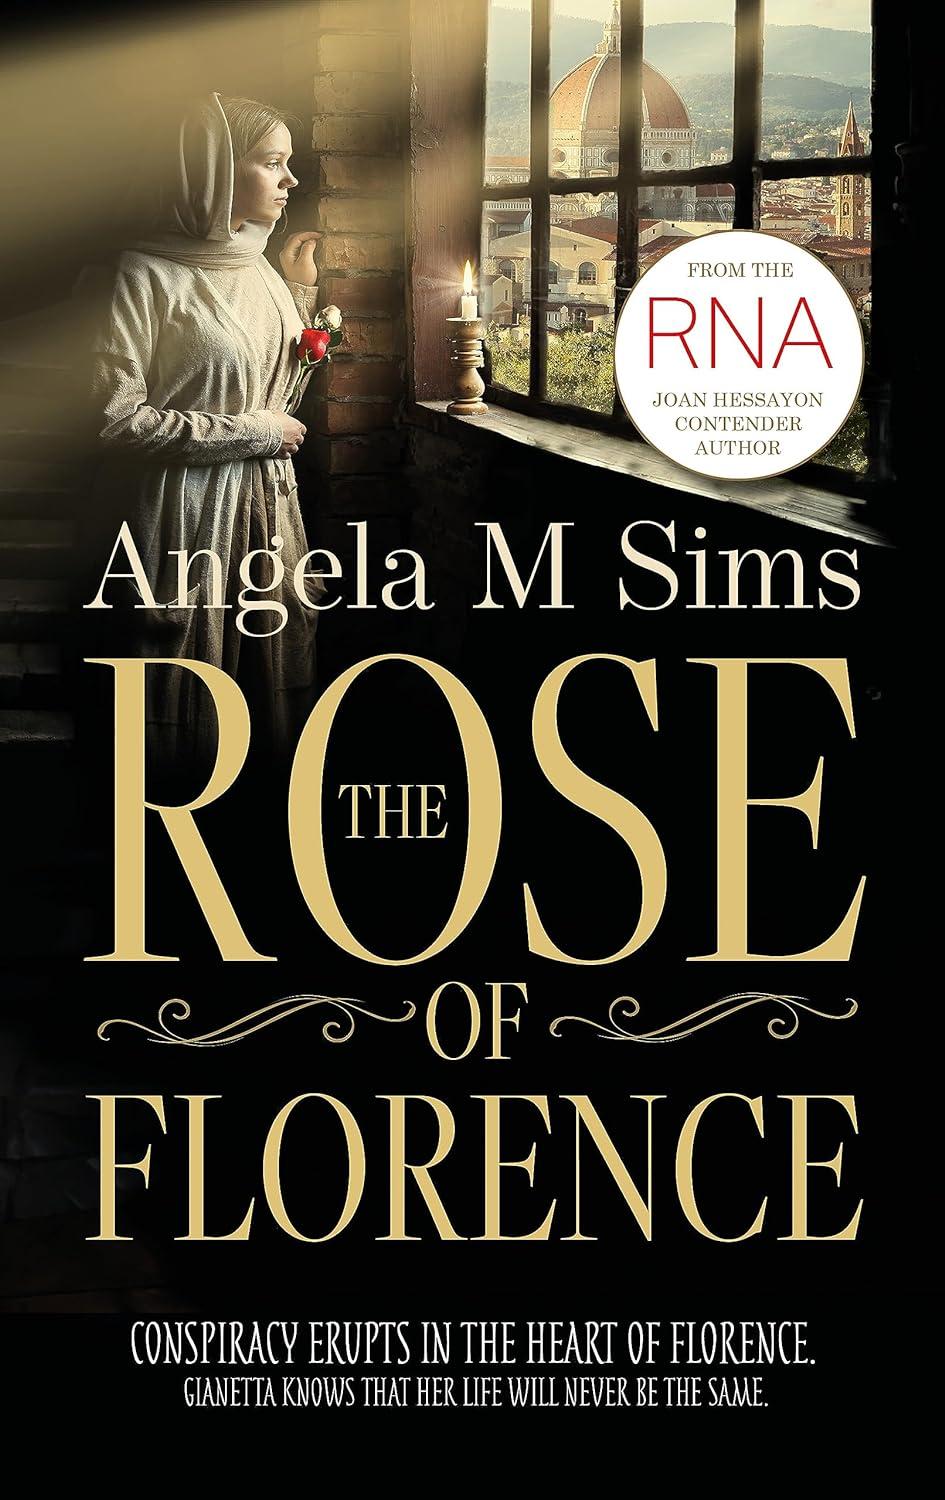 THE ROSE OF FLORENCE BY ANGELA M SIMS